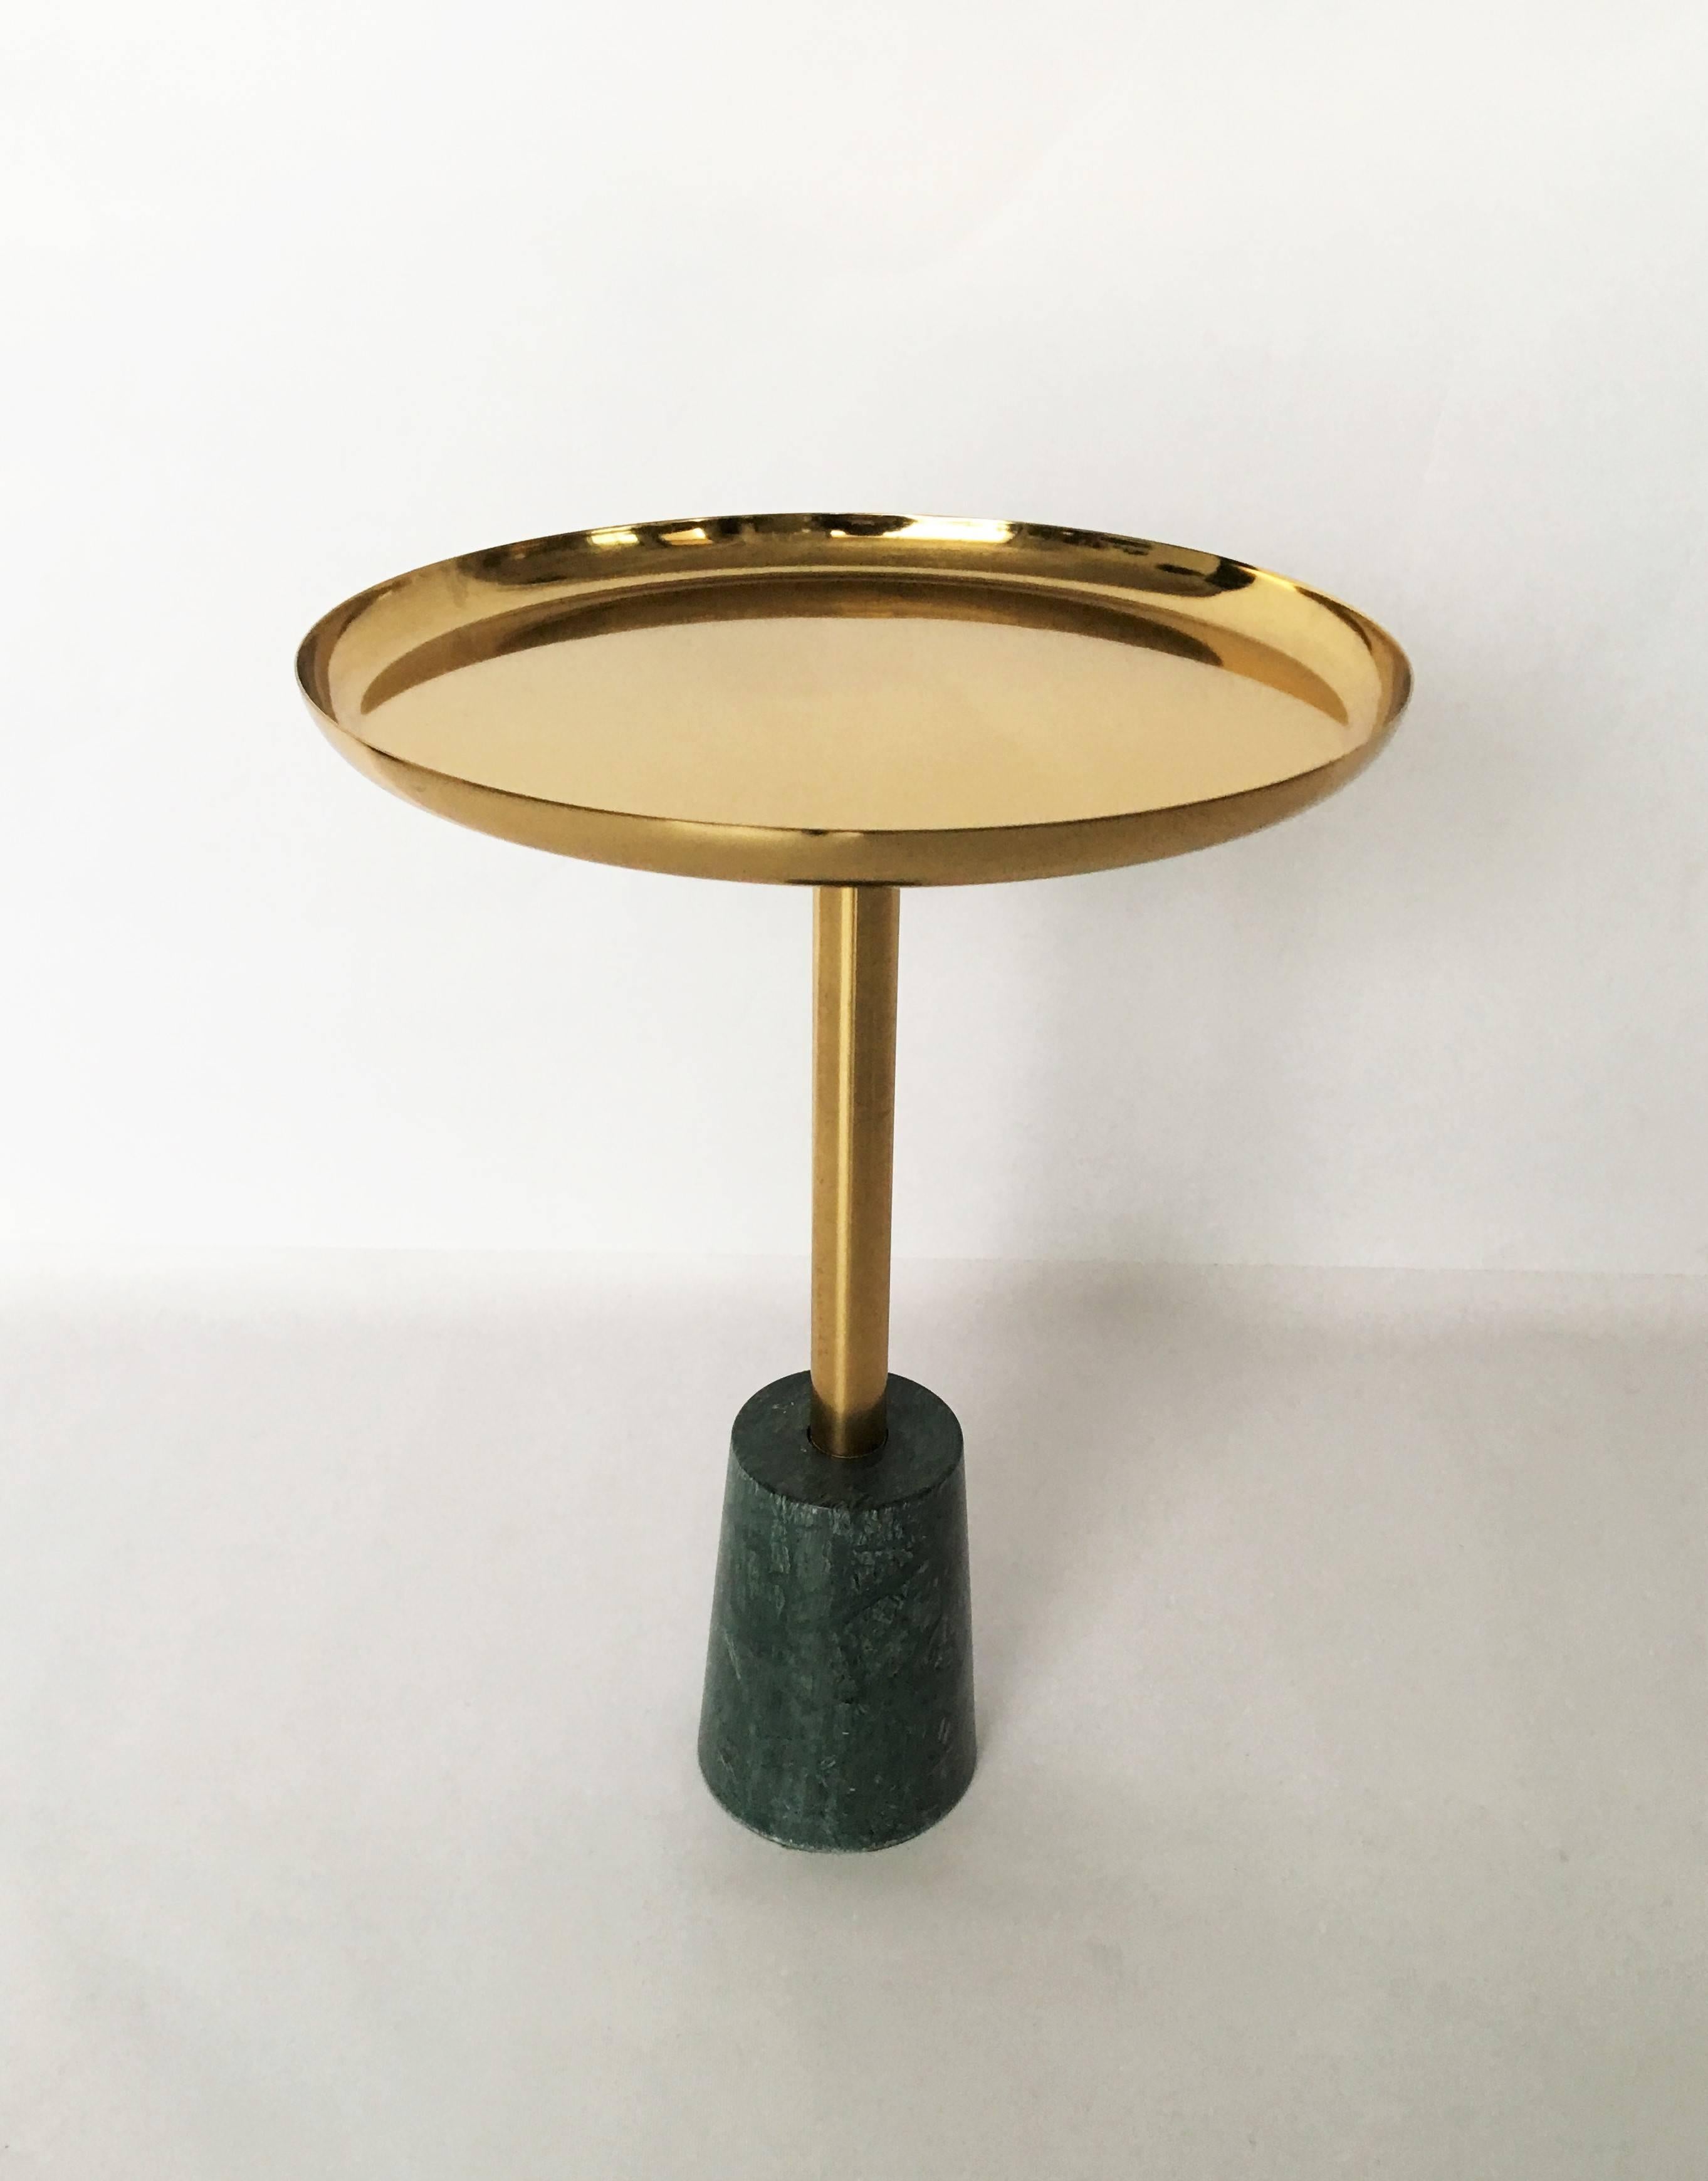 A stunning pair of side tables featuring sculptural green marble base provides stunning contrast to the brass top of this petite drink table, making it as much a minimalist work of art as it is a functional piece of furniture.